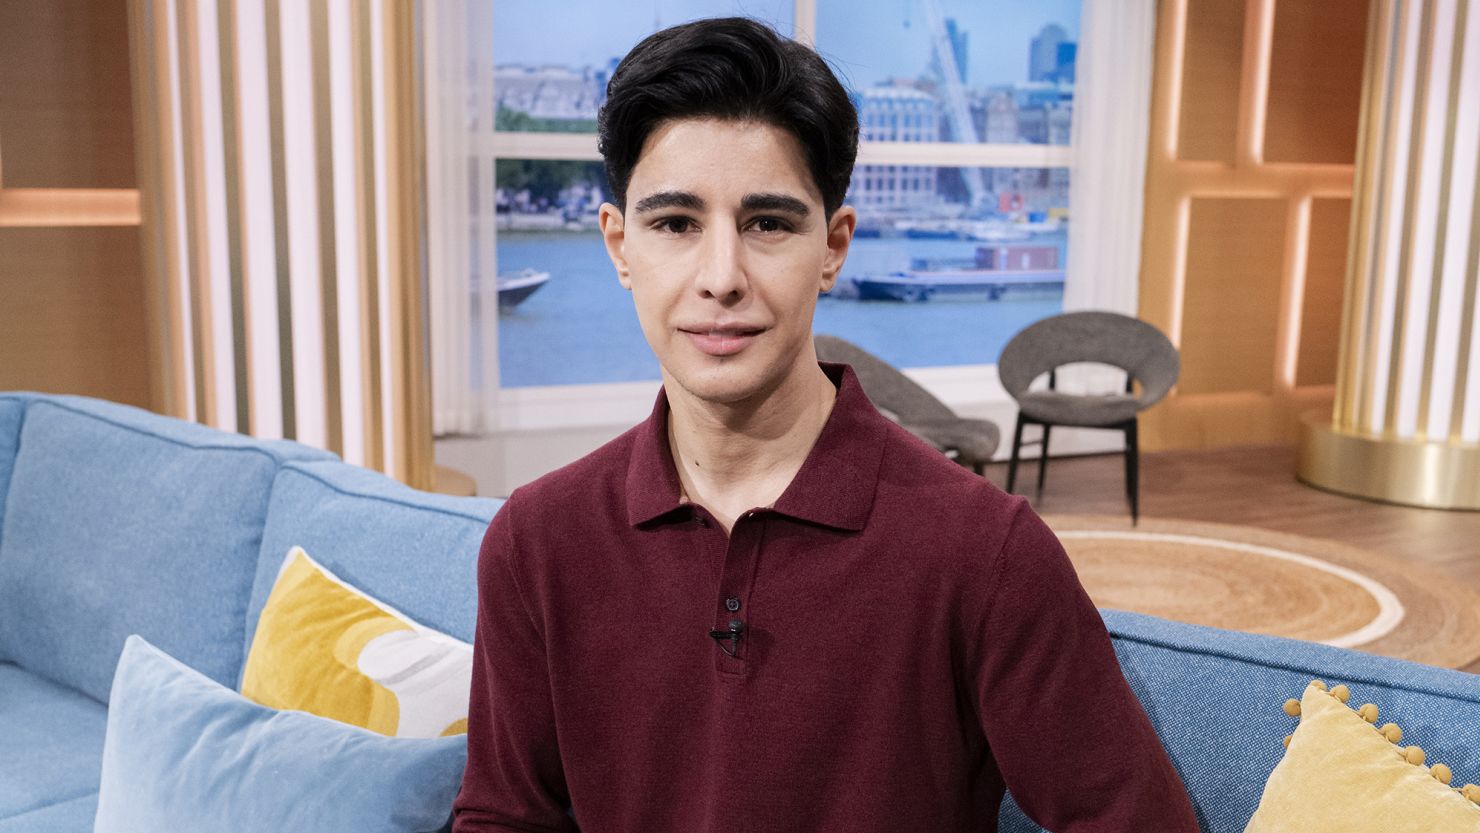 Editorial use only
Mandatory Credit: Photo by Ken McKay/ITV/Shutterstock (12397130r)
Omid Scobie
'This Morning' TV show, London, UK - 01 Sep 2021